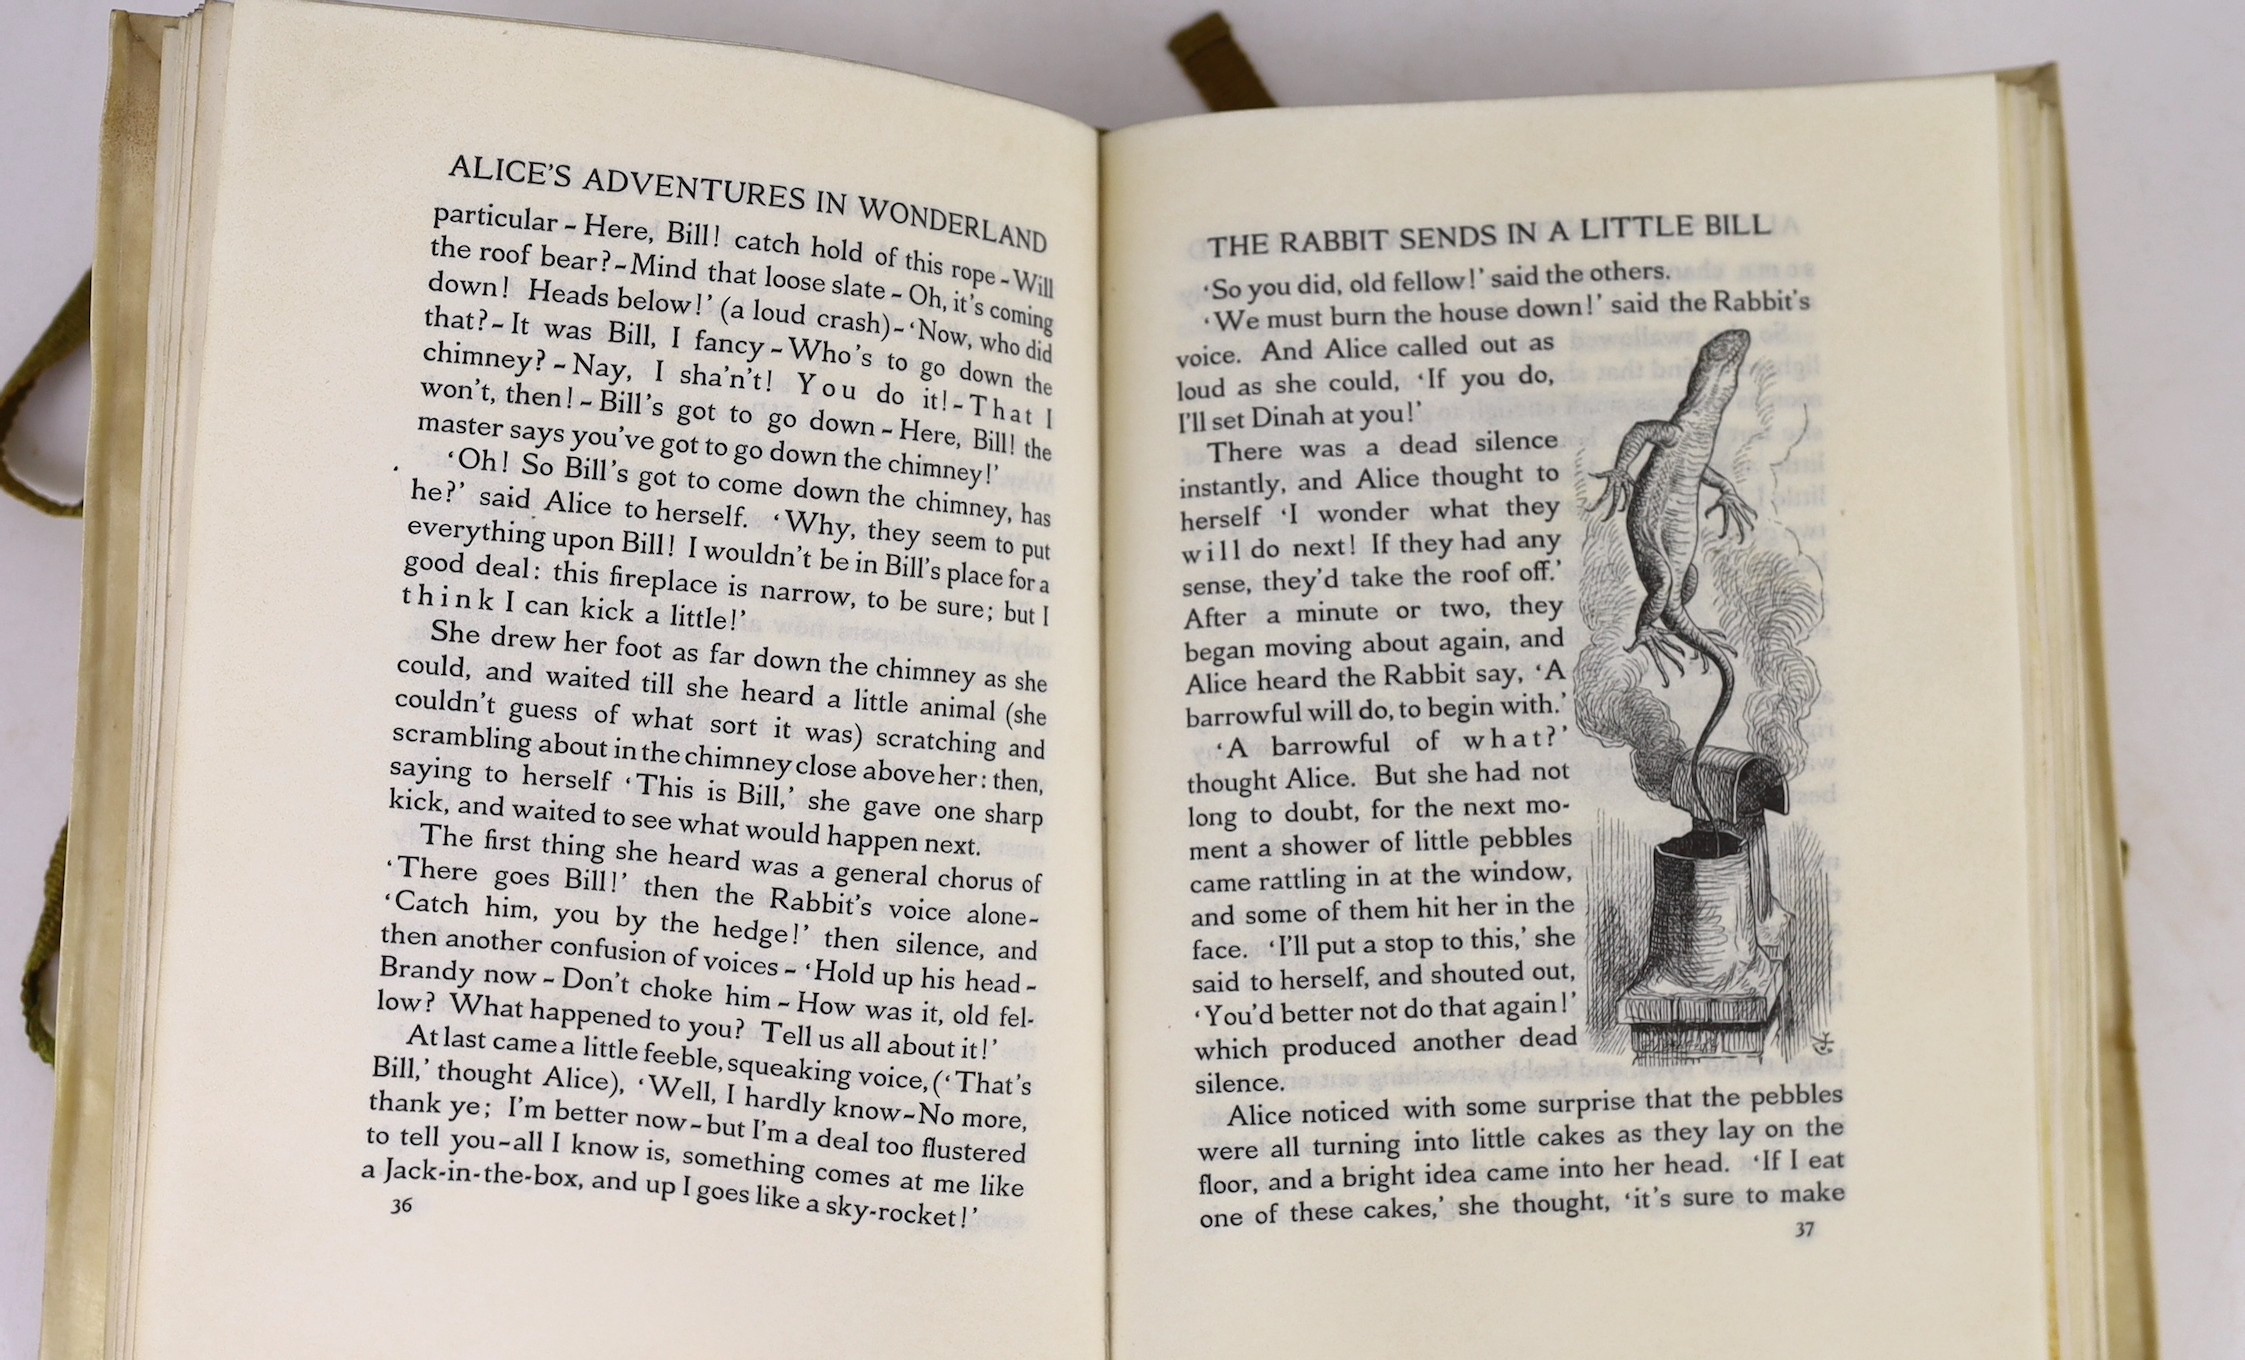 [Dodgson, Rev. Charles Lutwidge] - Alice's Adventures in Wonderland. By Lewis Carroll ... Limited Edition (of 1,000 numbered copies - but one of the additional only 12 printed on vellum). frontis and num. text illus (by